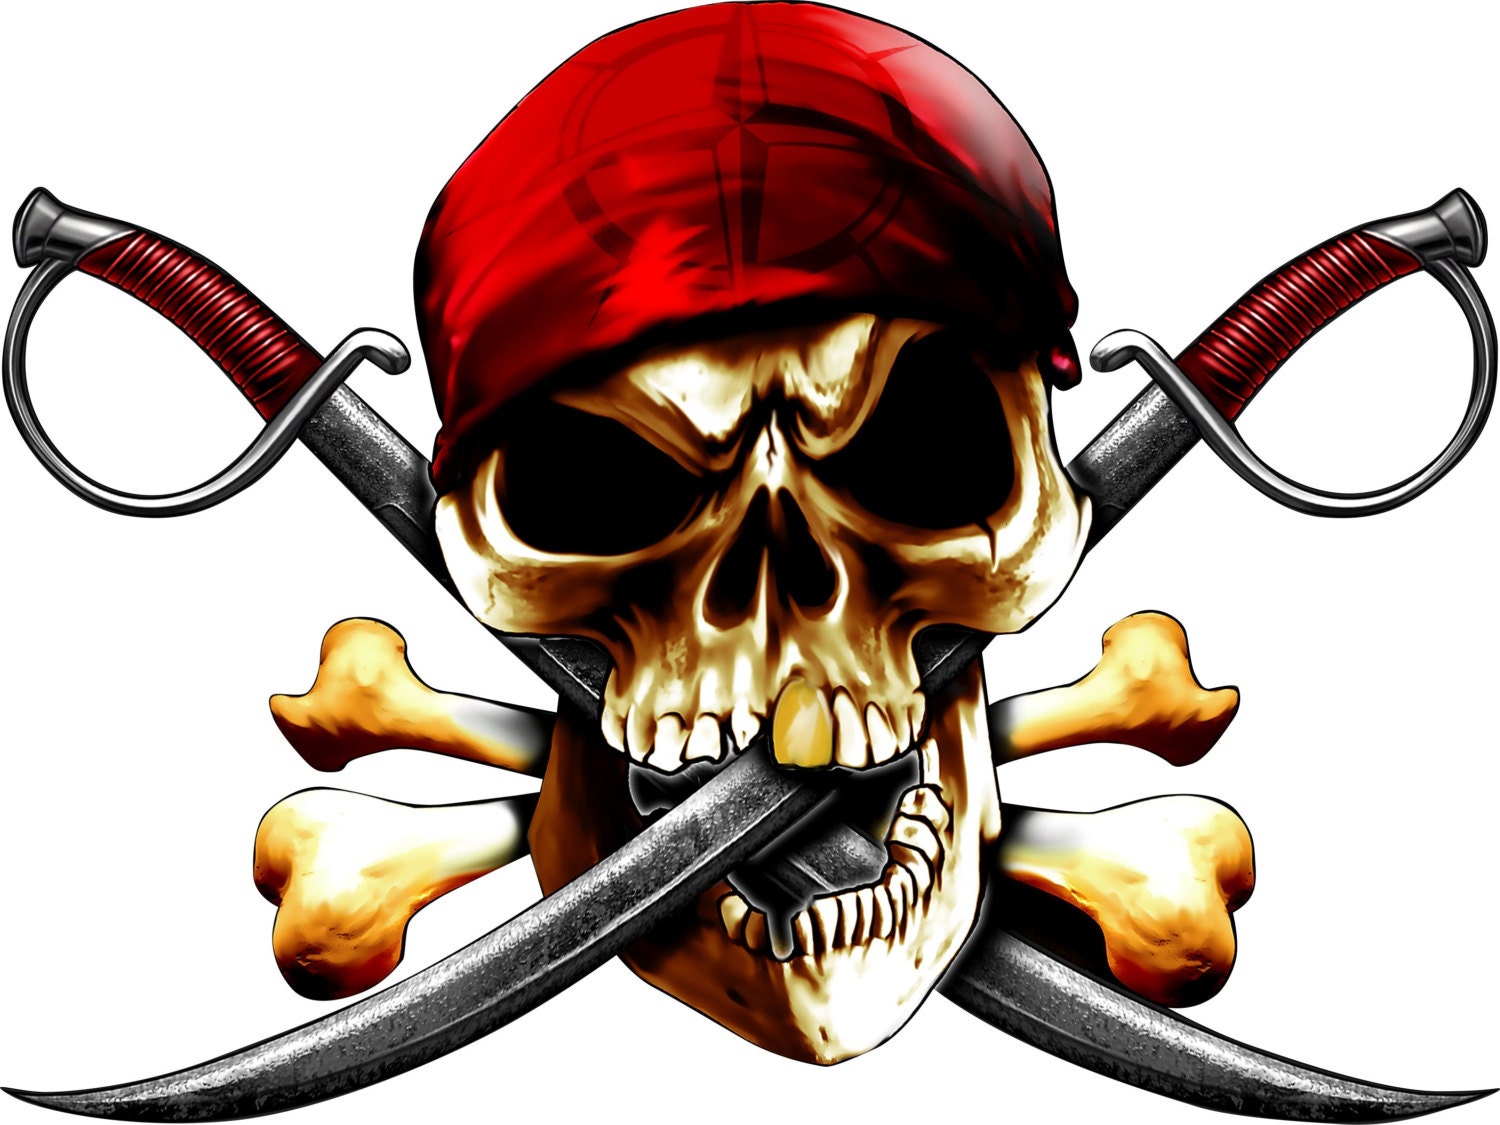 Handicapped Pirate V1 Oval Full Color Printed Vinyl Decal Window Sticker